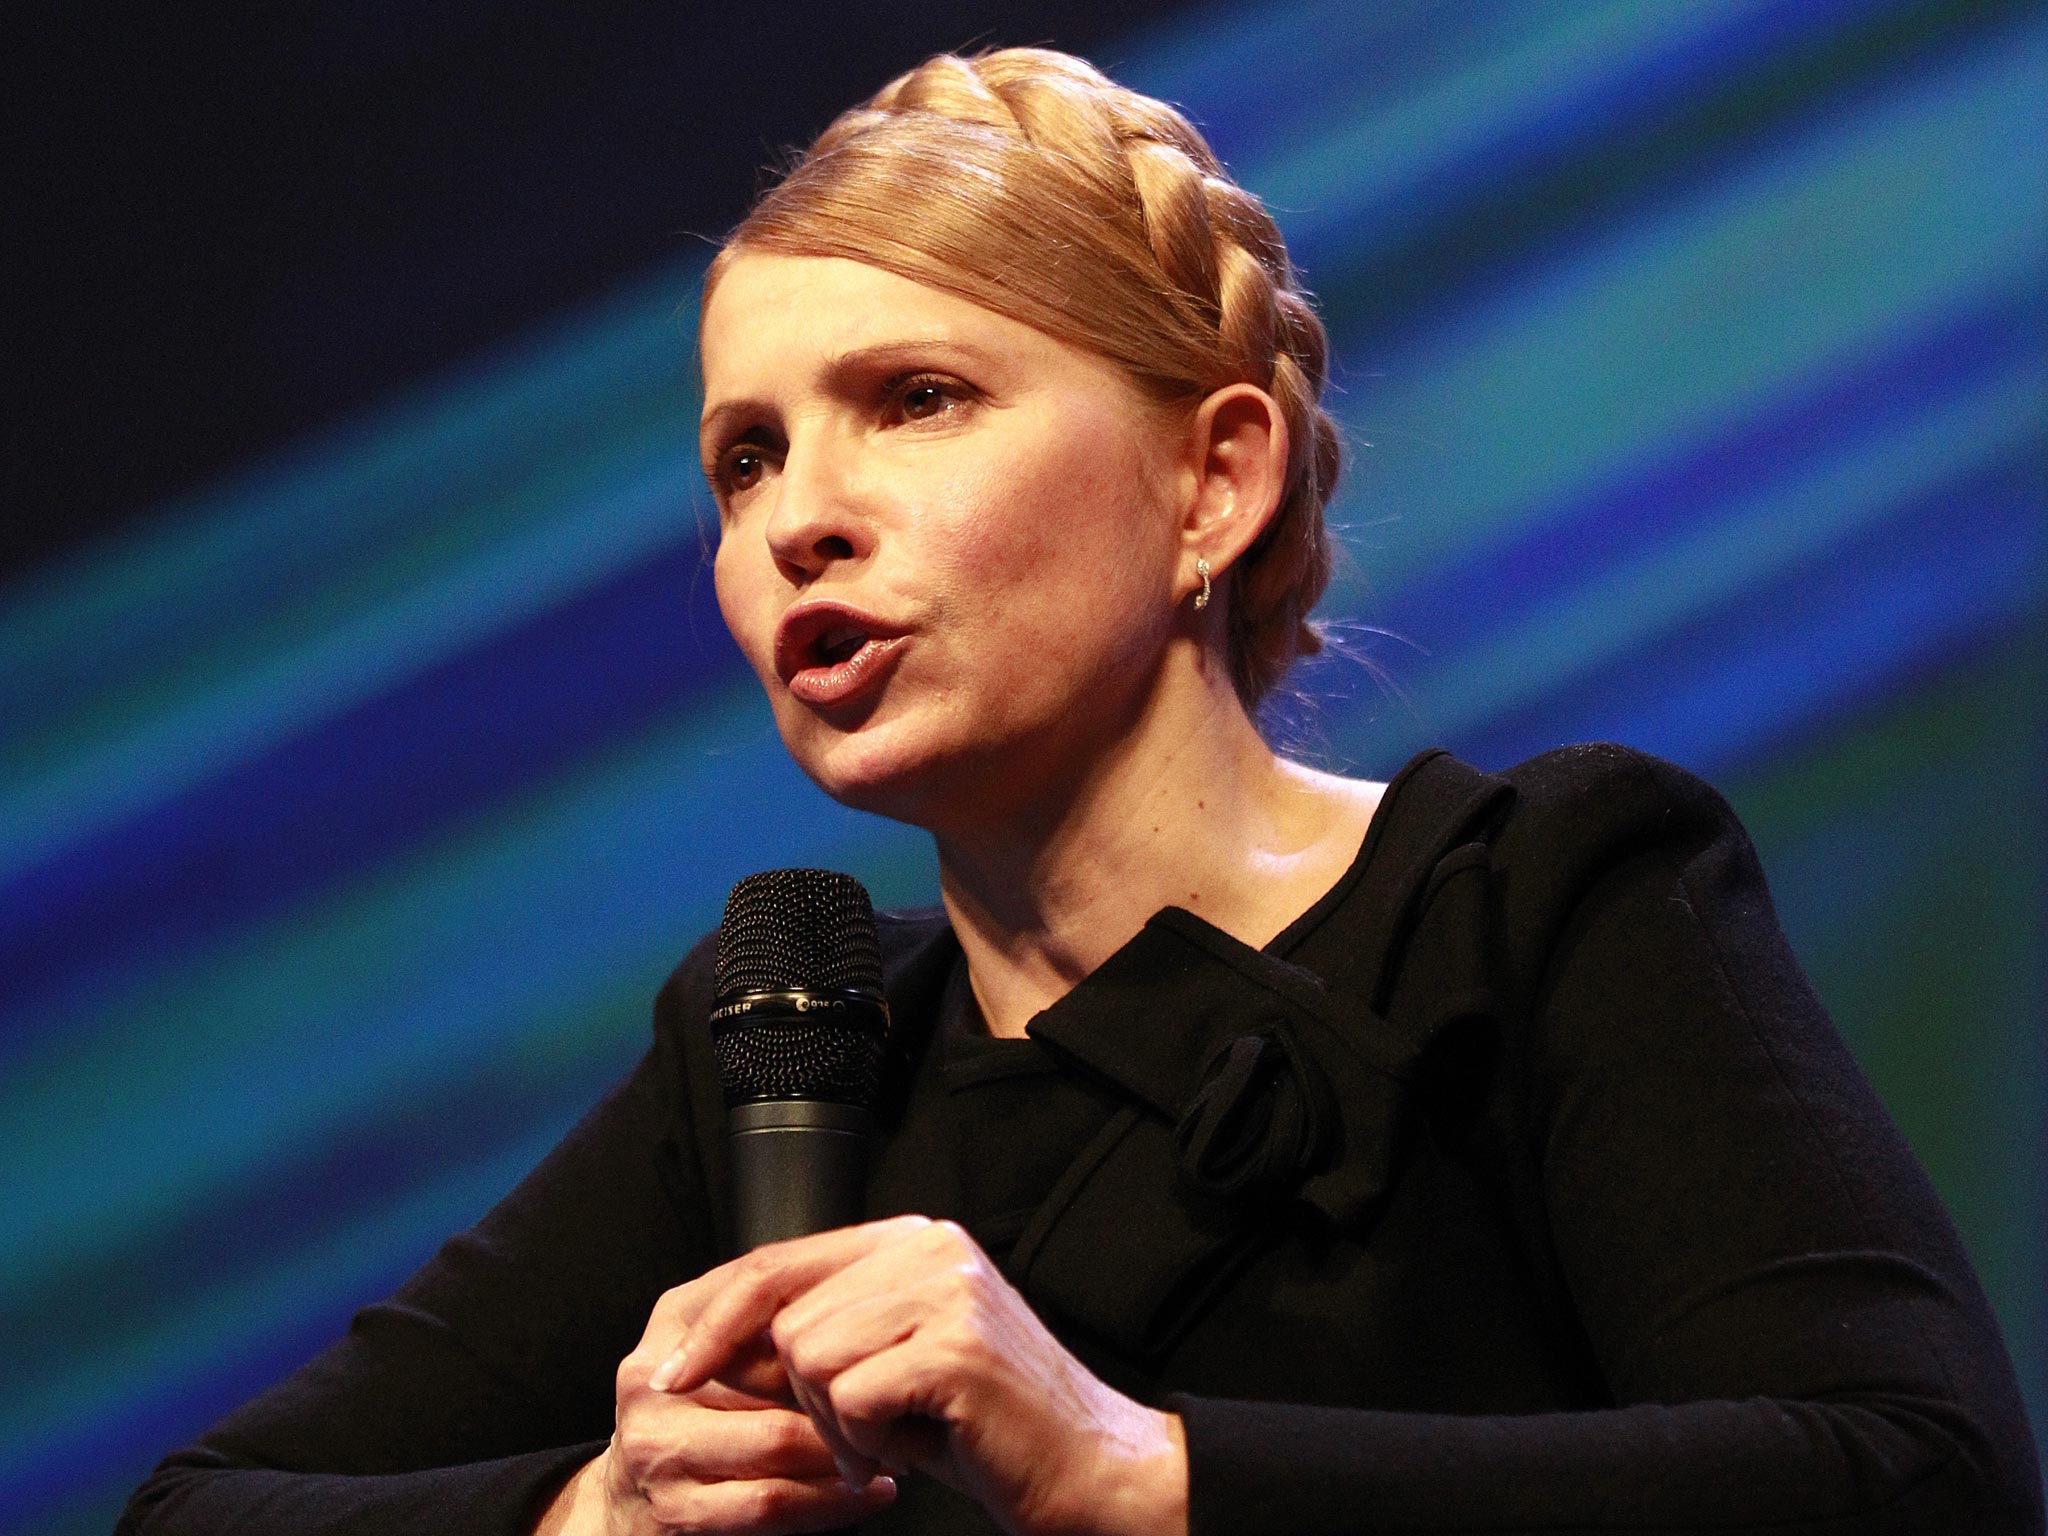 Yulia Tymoshenko was not charged in the US 10 years ago over allegations over missing funds